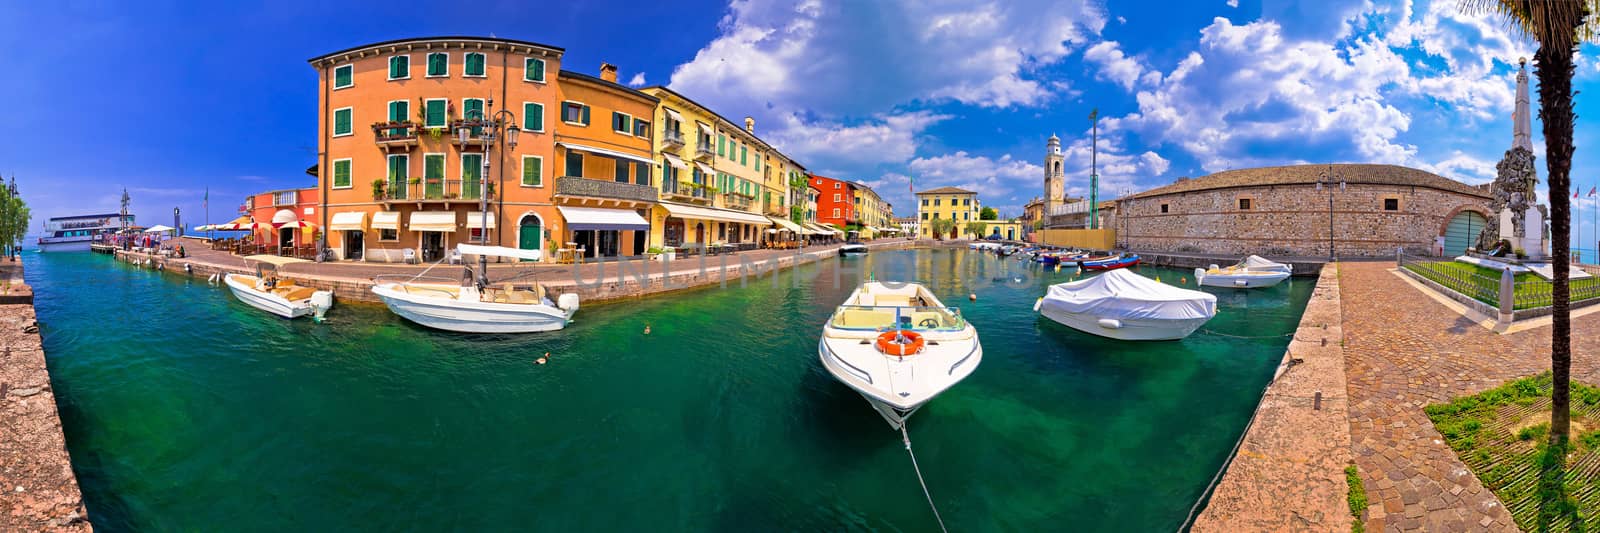 Lazise colorful harbor and boats panoramic view by xbrchx